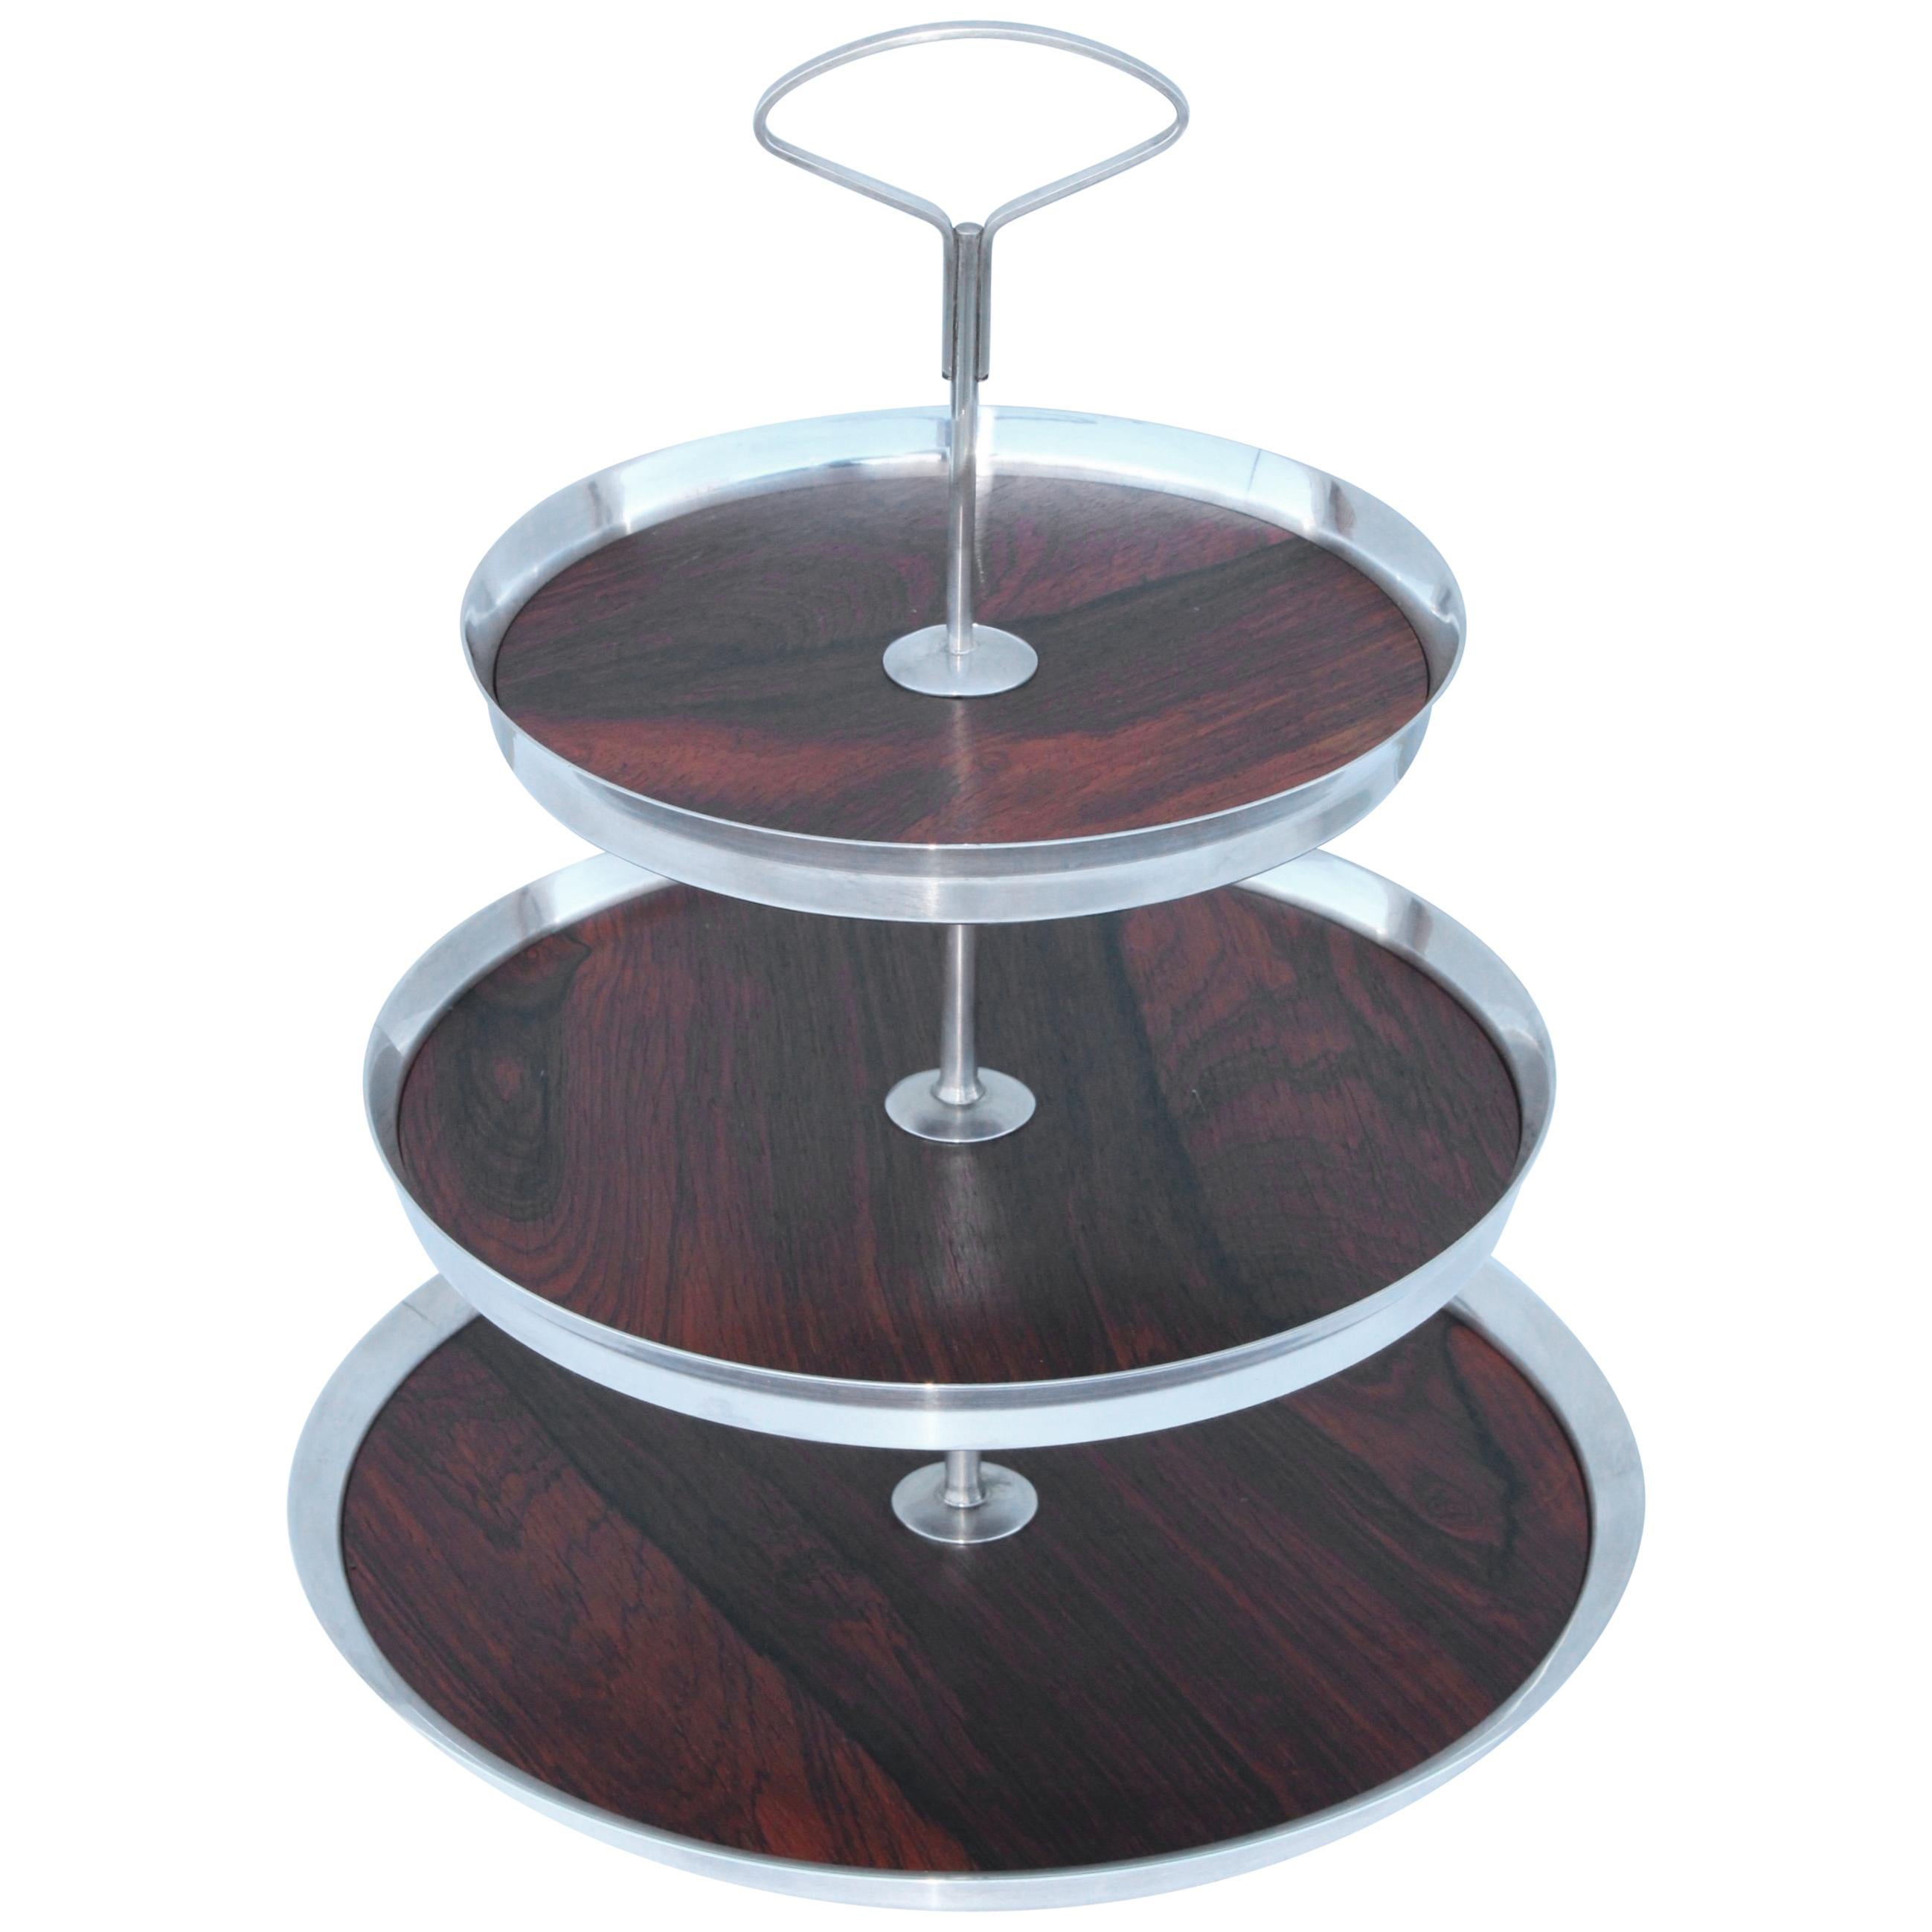 1950s Danish Silver Plate and Rosewood Three-Tier Cake Stand